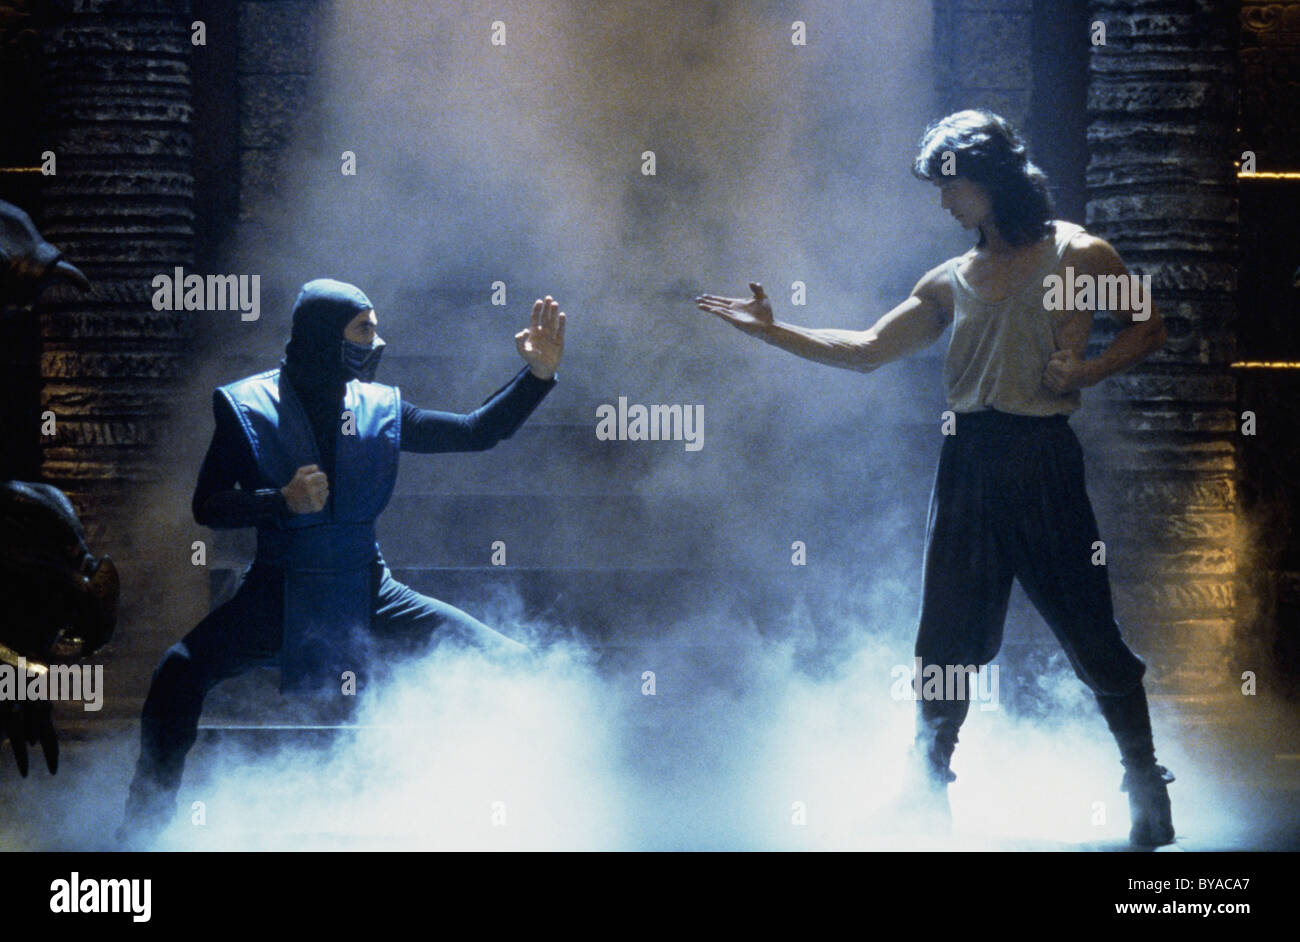 Mortal Kombat (1995)  Paul W.S. Anderson – To the '90s and Beyond!